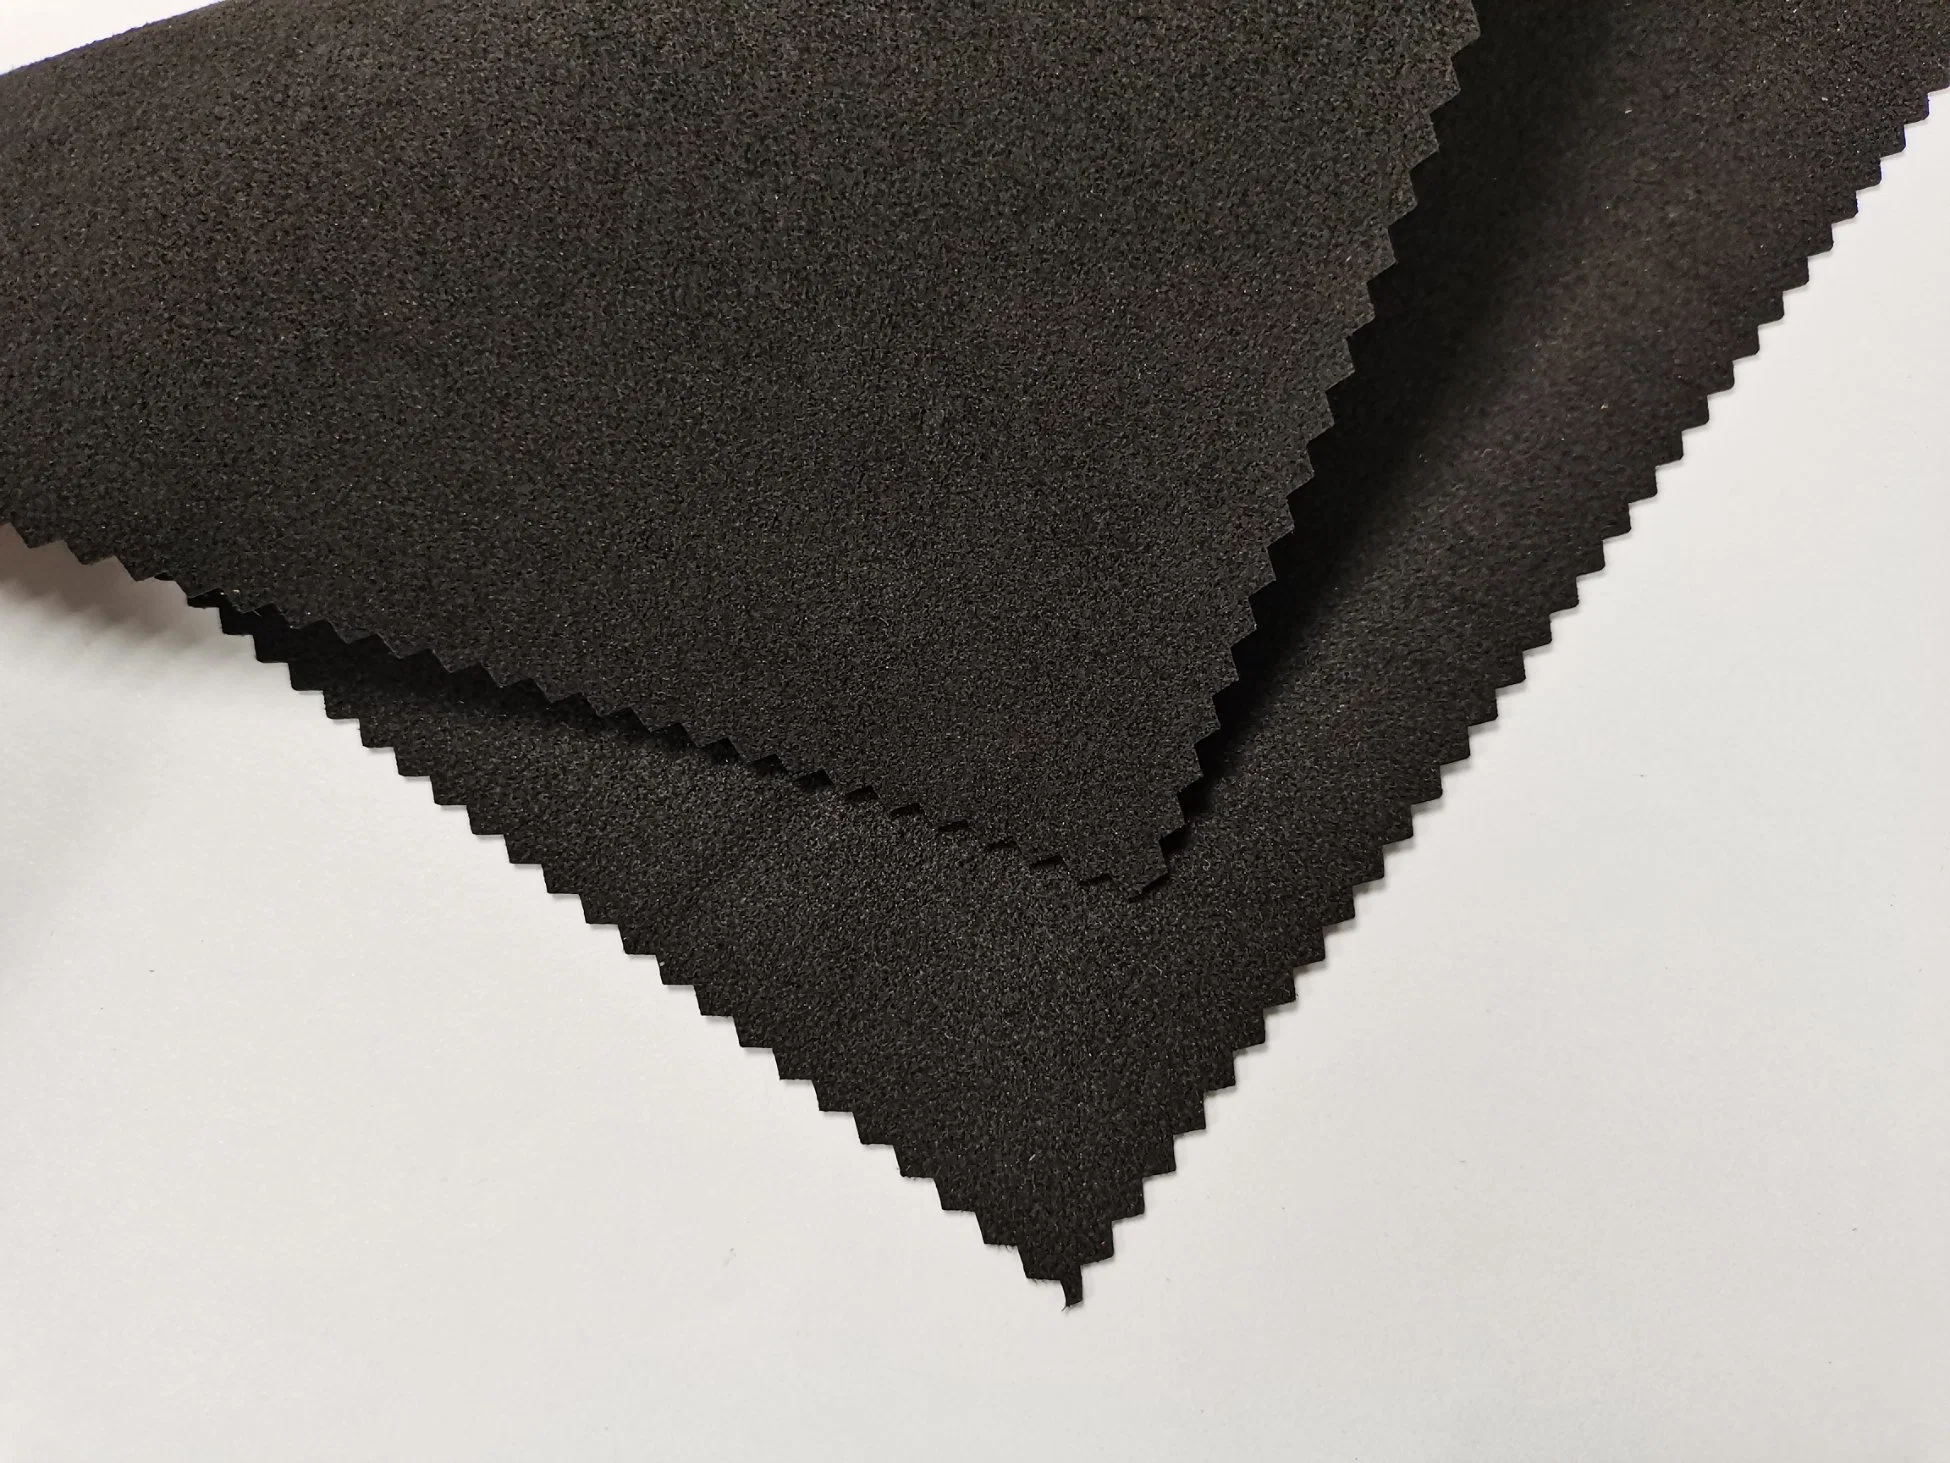 Leather Microfiber Suede Fabric Huafon Non-Woven Fabric Soft Suede for Gloves, Shoes